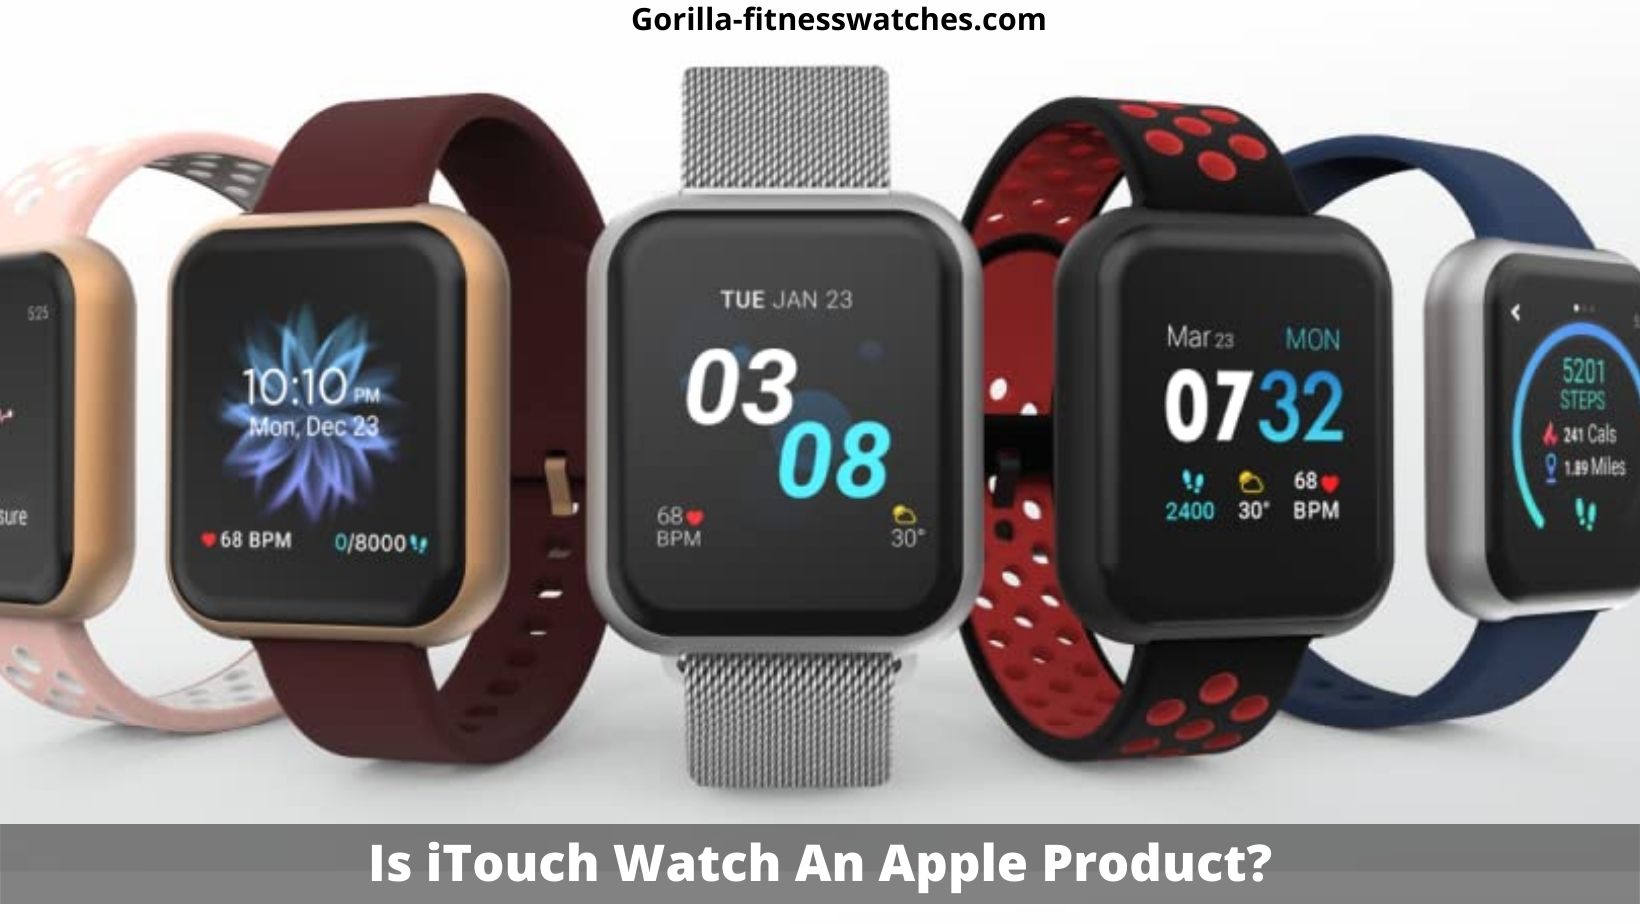 Is iTouch Watch An Apple Product?